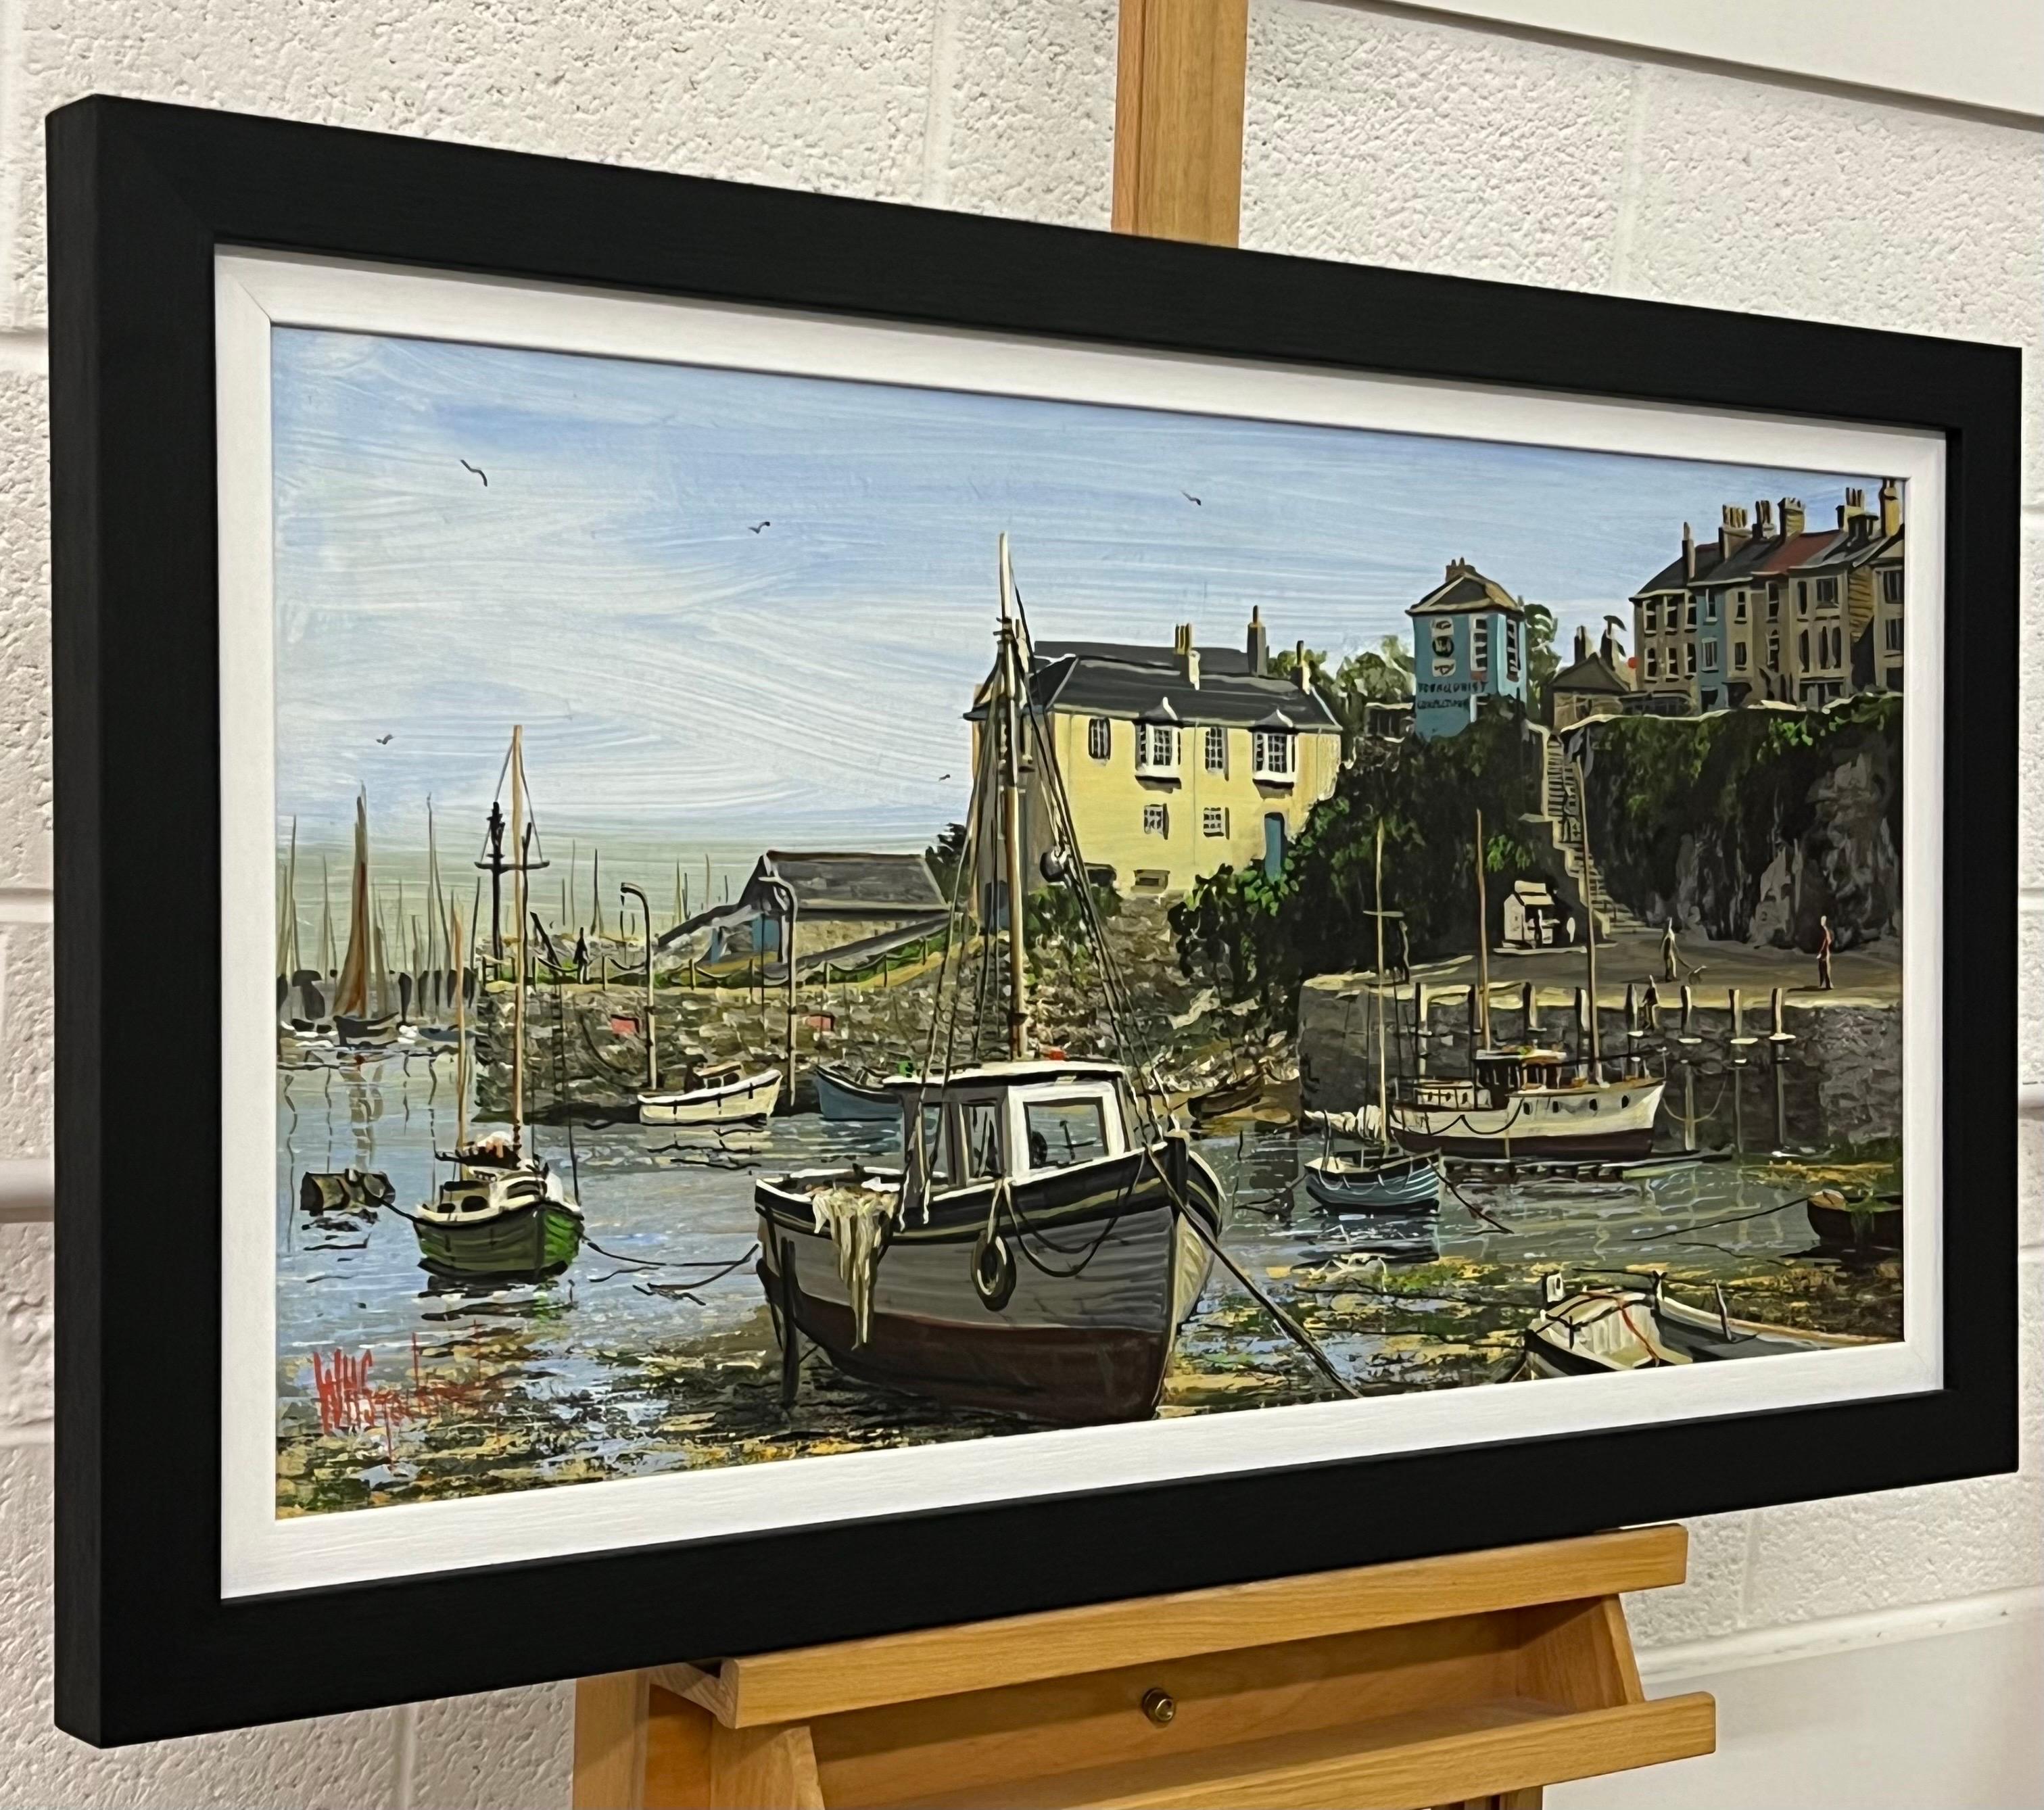 Vintage 1970's Harbour Scene with Moored Boats & Figures by British Artist - Painting by William Stockman